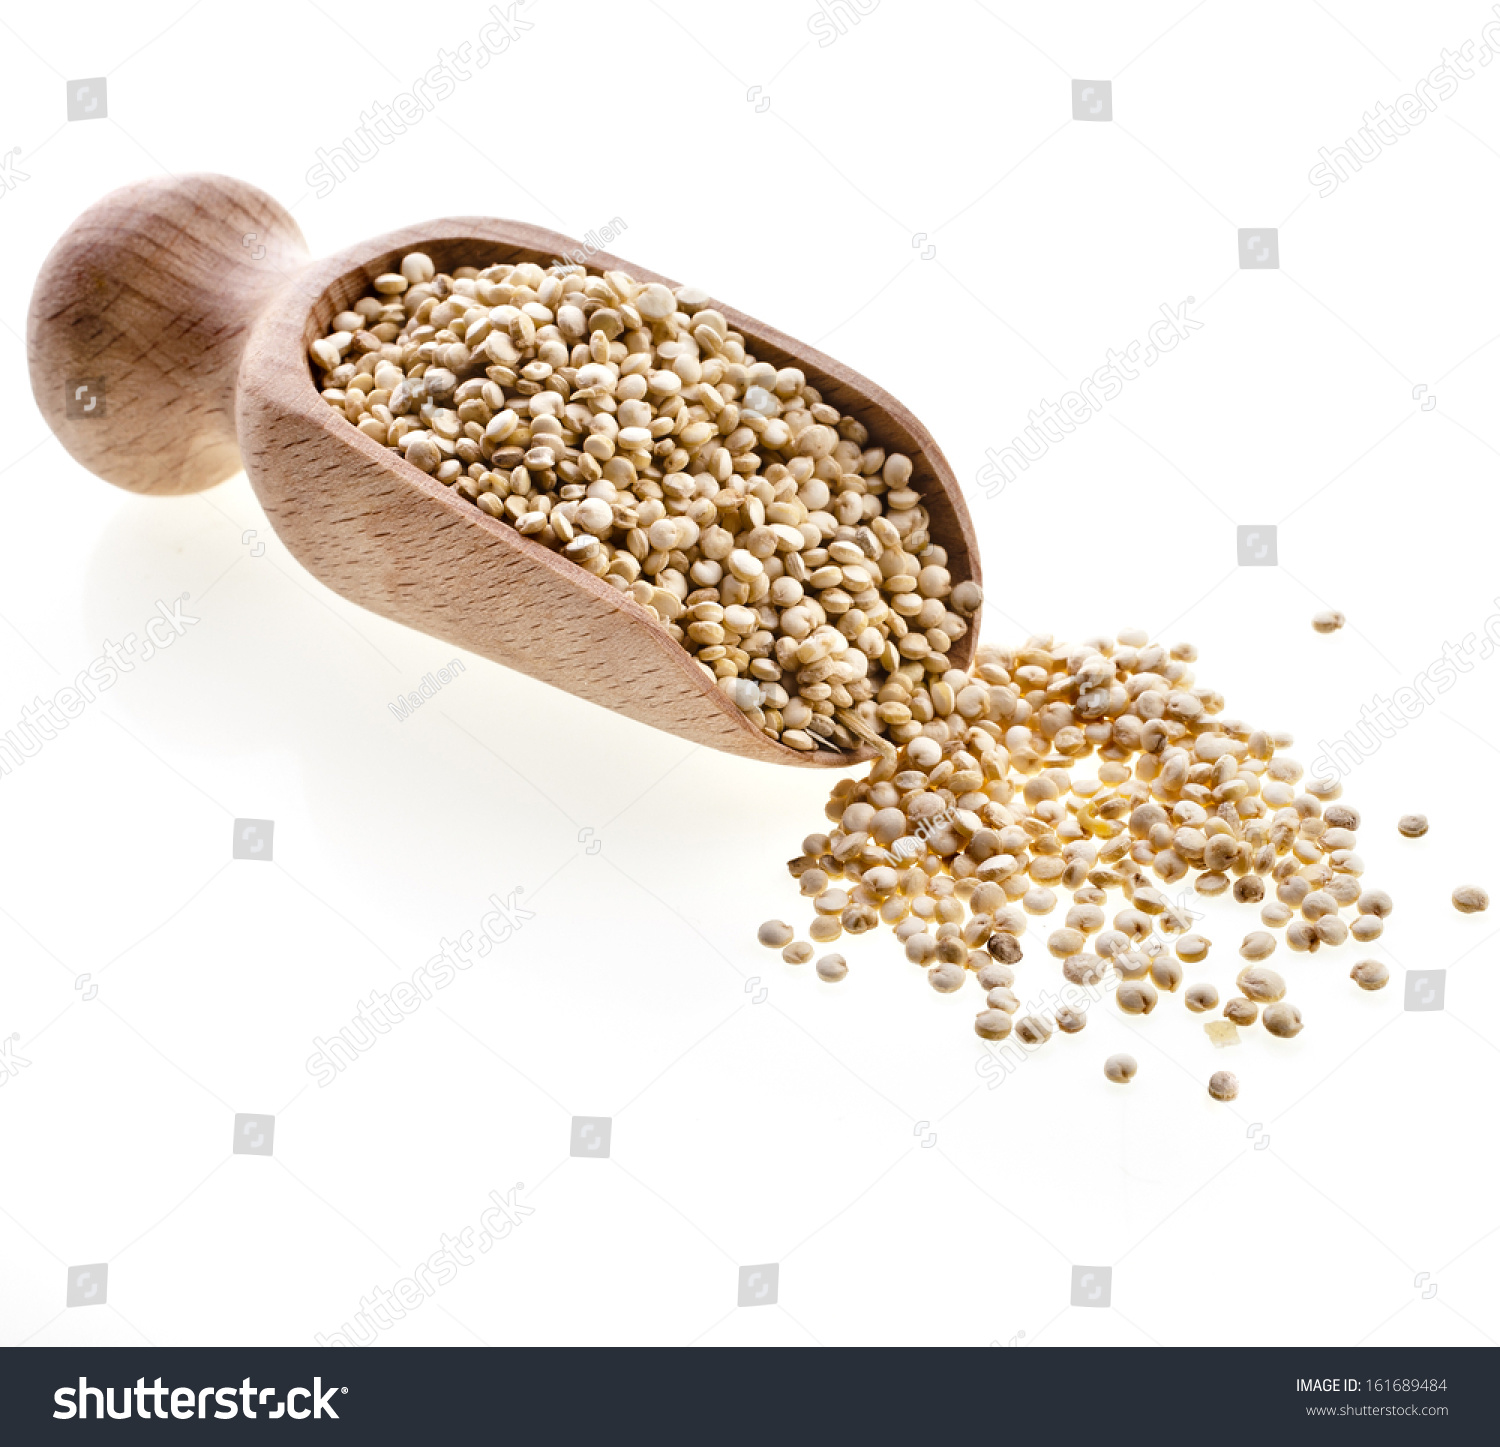 quinoa seed grain  in a wooden bowl scoop close up isolated on a white background #161689484